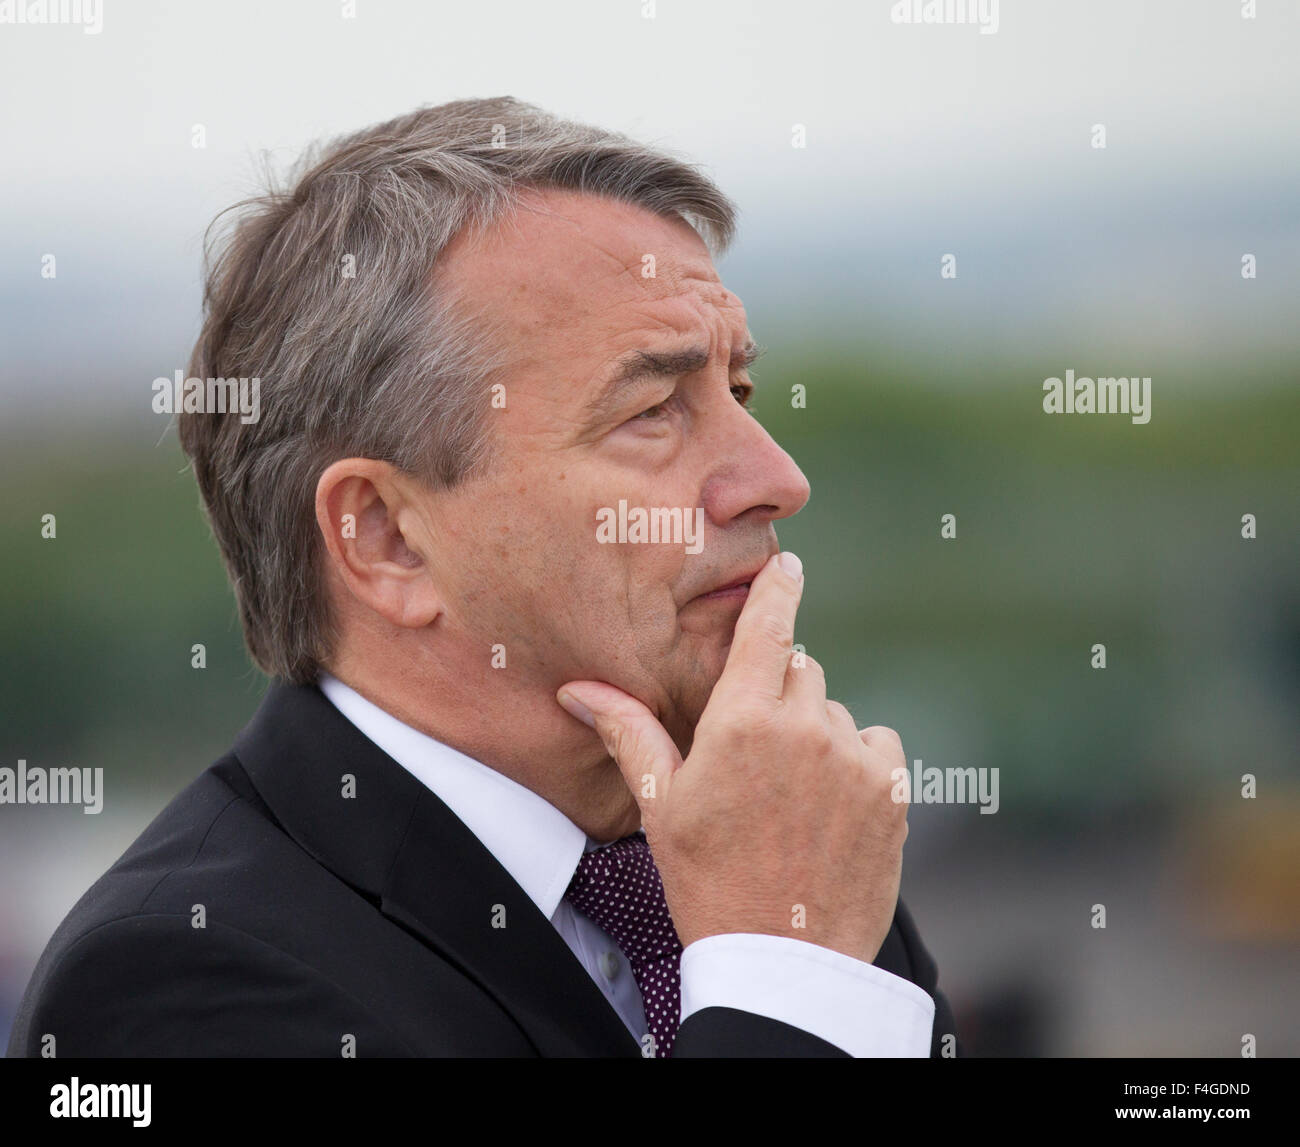 President of German Football Association DFB, Wofgang Niersbach lays down a wreath at the Monument of the Coast Defenders in Westerplatte in Gdansk, Poland, 20 Juni 2012. The peninsula of Westerplatte was the place of the first battle of WWII, when German troops attacked Poland on 01 September 1939. Photo: Jens Wolf dpa Stock Photo